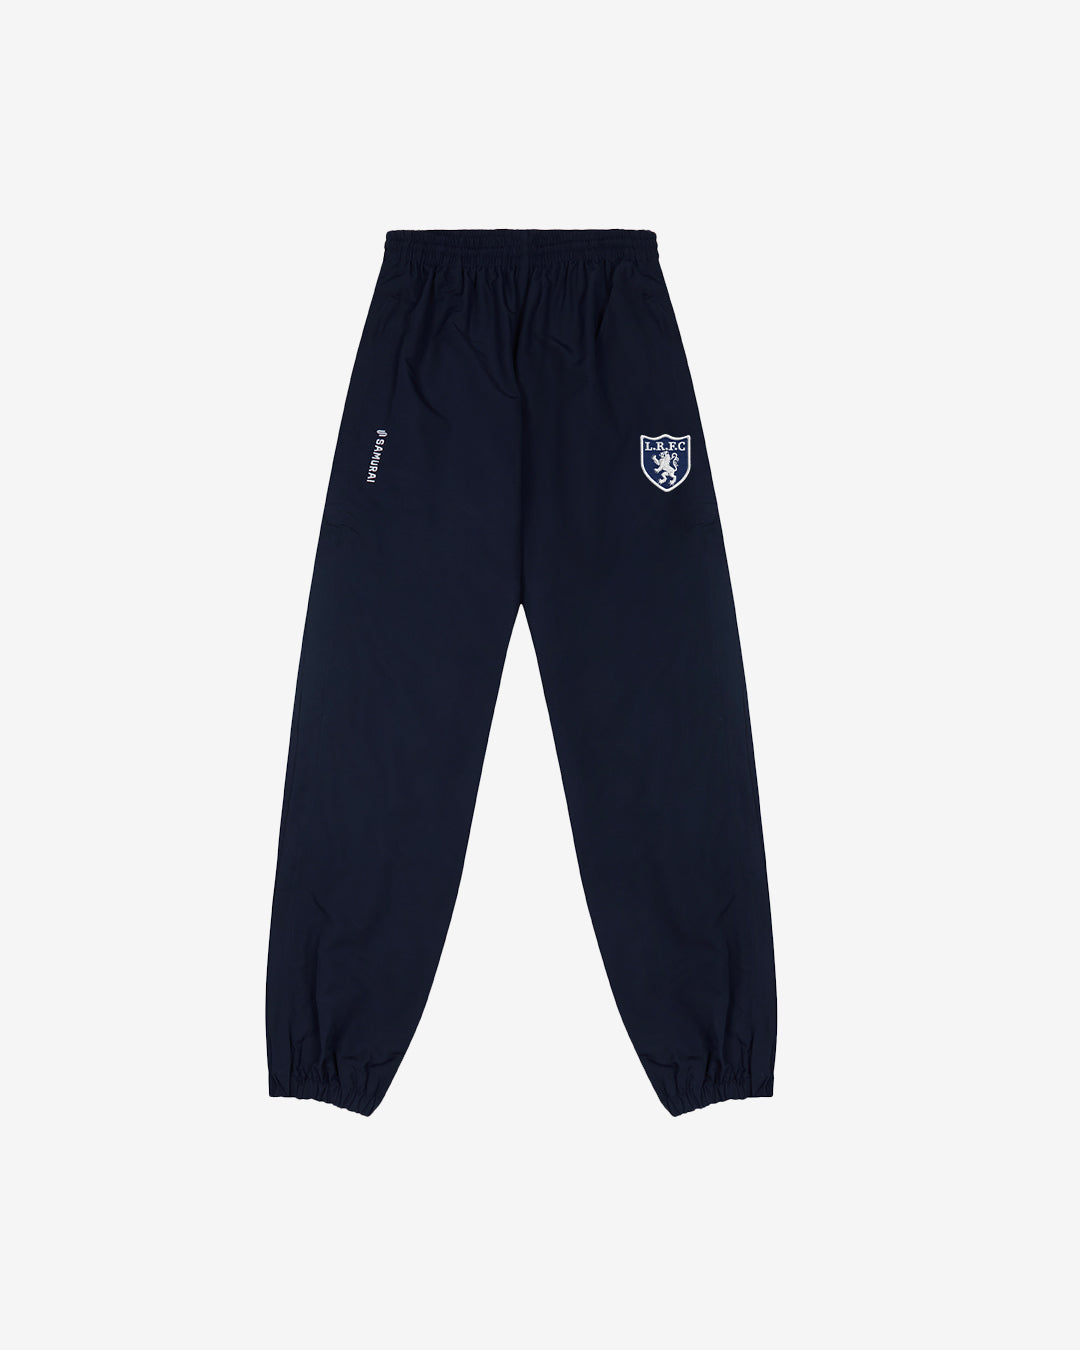 Lewes RFC - EP:0104 - Southland Track Pant 2.0 - Navy